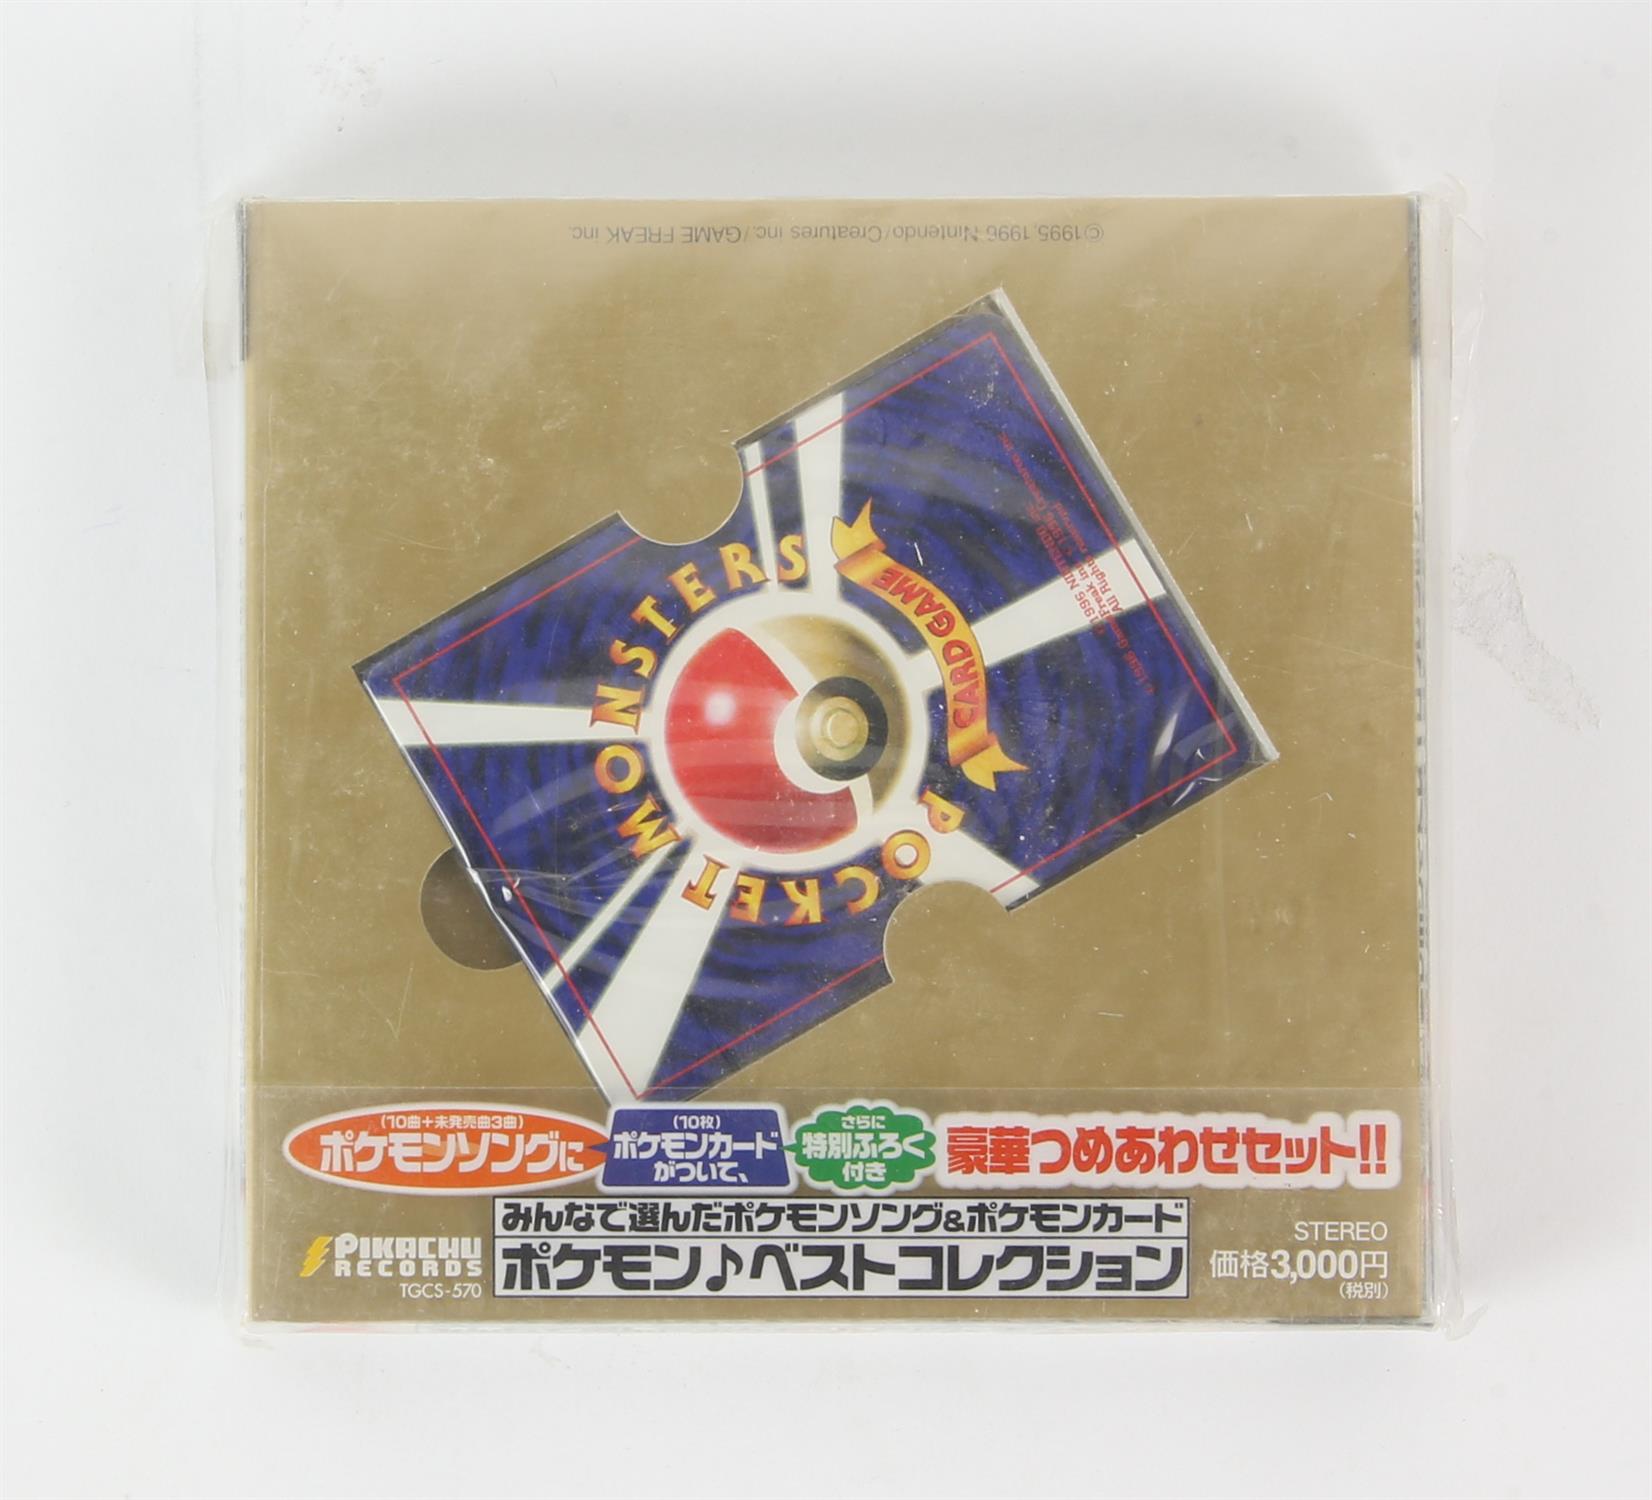 Pokémon CD Japanese Promo factory sealed from 1998 contains cards including Charizard Holo